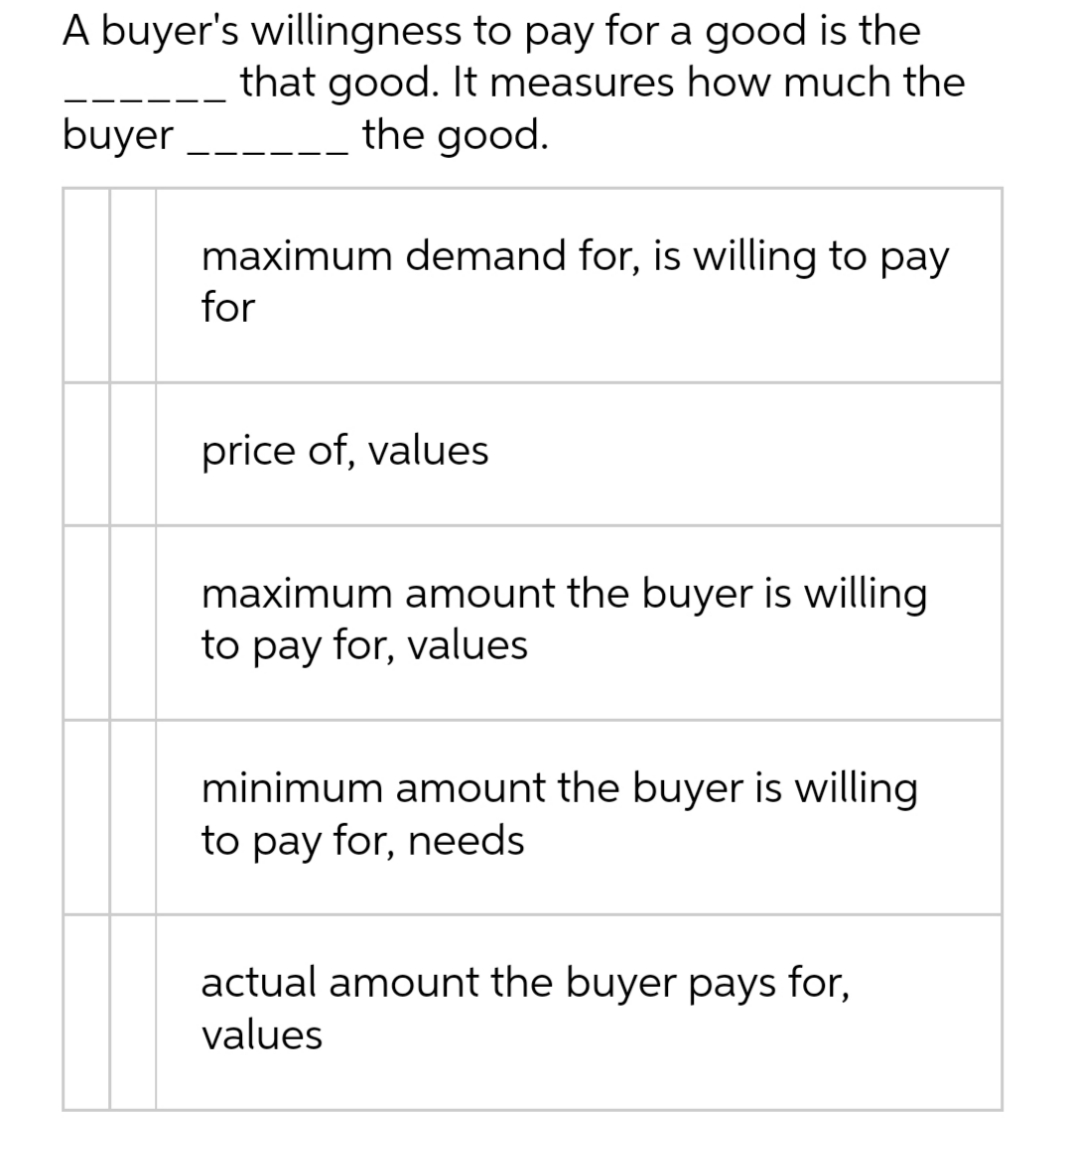 A buyer's willingness to pay for a good is the
that good. It measures how much the
the good.
buyer
maximum demand for, is willing to pay
for
price of, values
maximum amount the buyer is willing
to pay for, values
minimum amount the buyer is willing
to pay for, needs
actual amount the buyer pays for,
values
